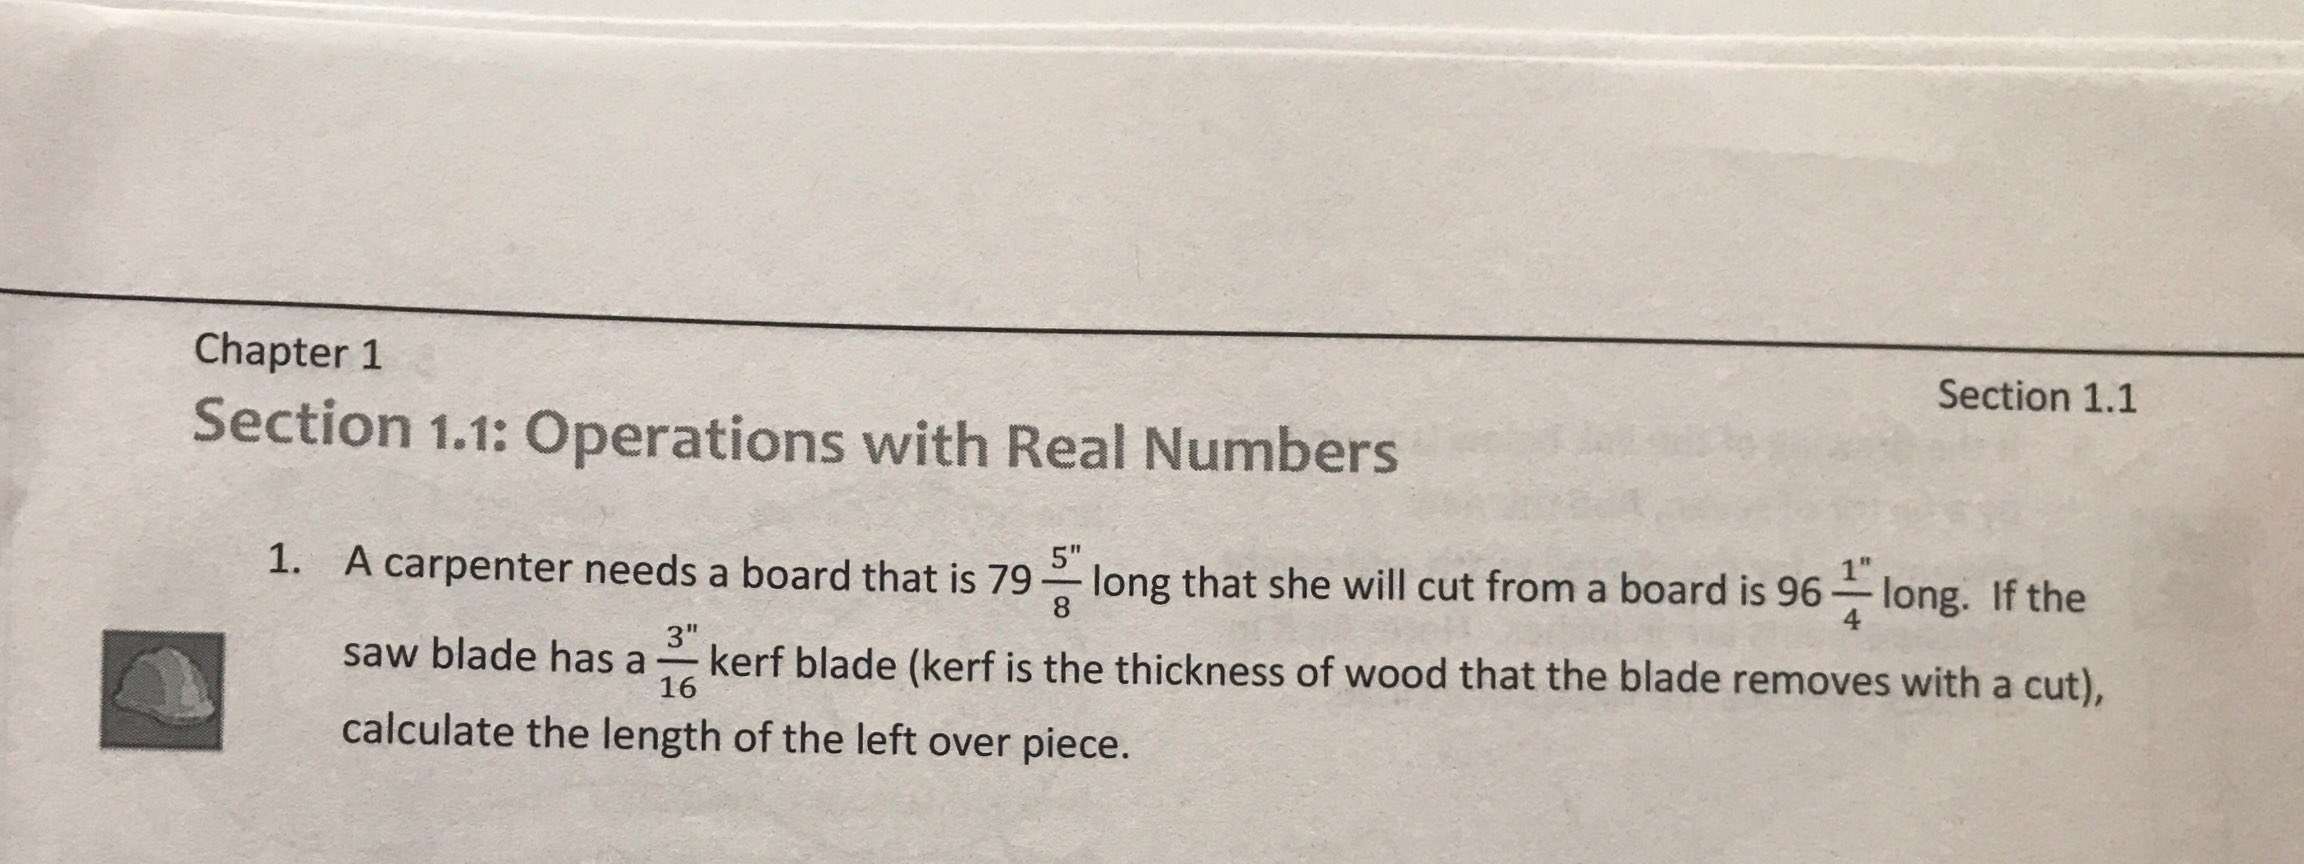 Chapter 1
Section 1.1
Section 1.1: Operations with Real Numbers
I1
1. A carpenter needs a board that is 79 g long that she will cut from a board is 96
"long, if the
4
saw blade has a kerf blade (kerf is the thickness of wood that the blade removes with a cut),
calculate the length of the left over piece.
3"
16
